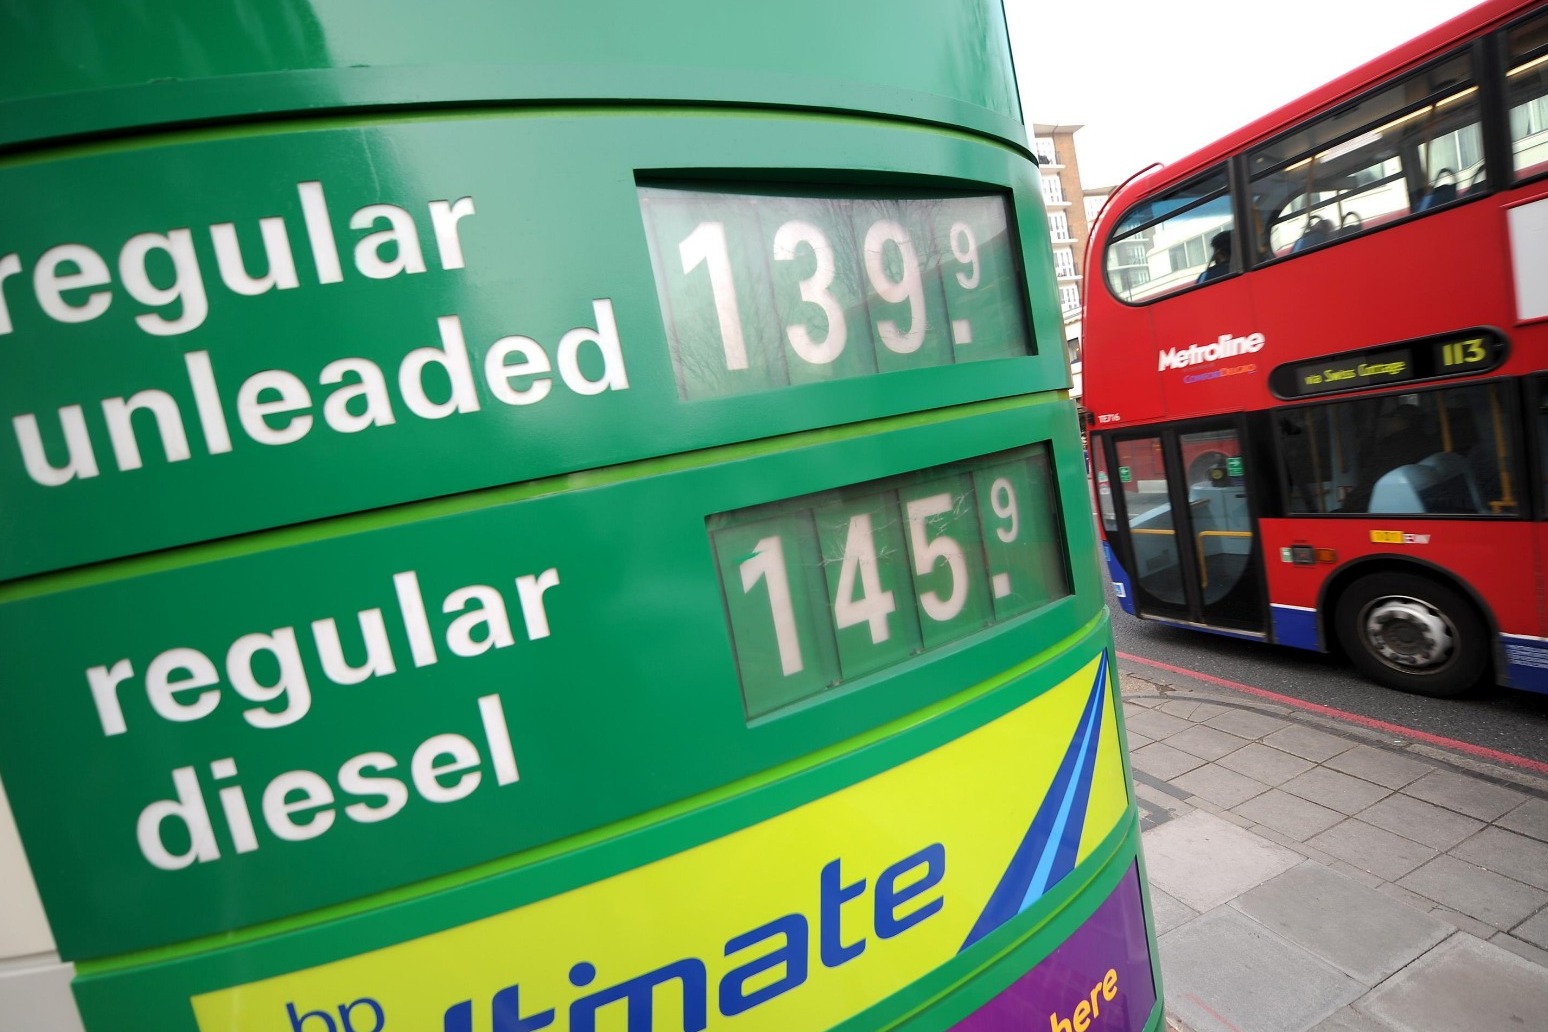 Petrol prices closing in on record high, analysis shows 